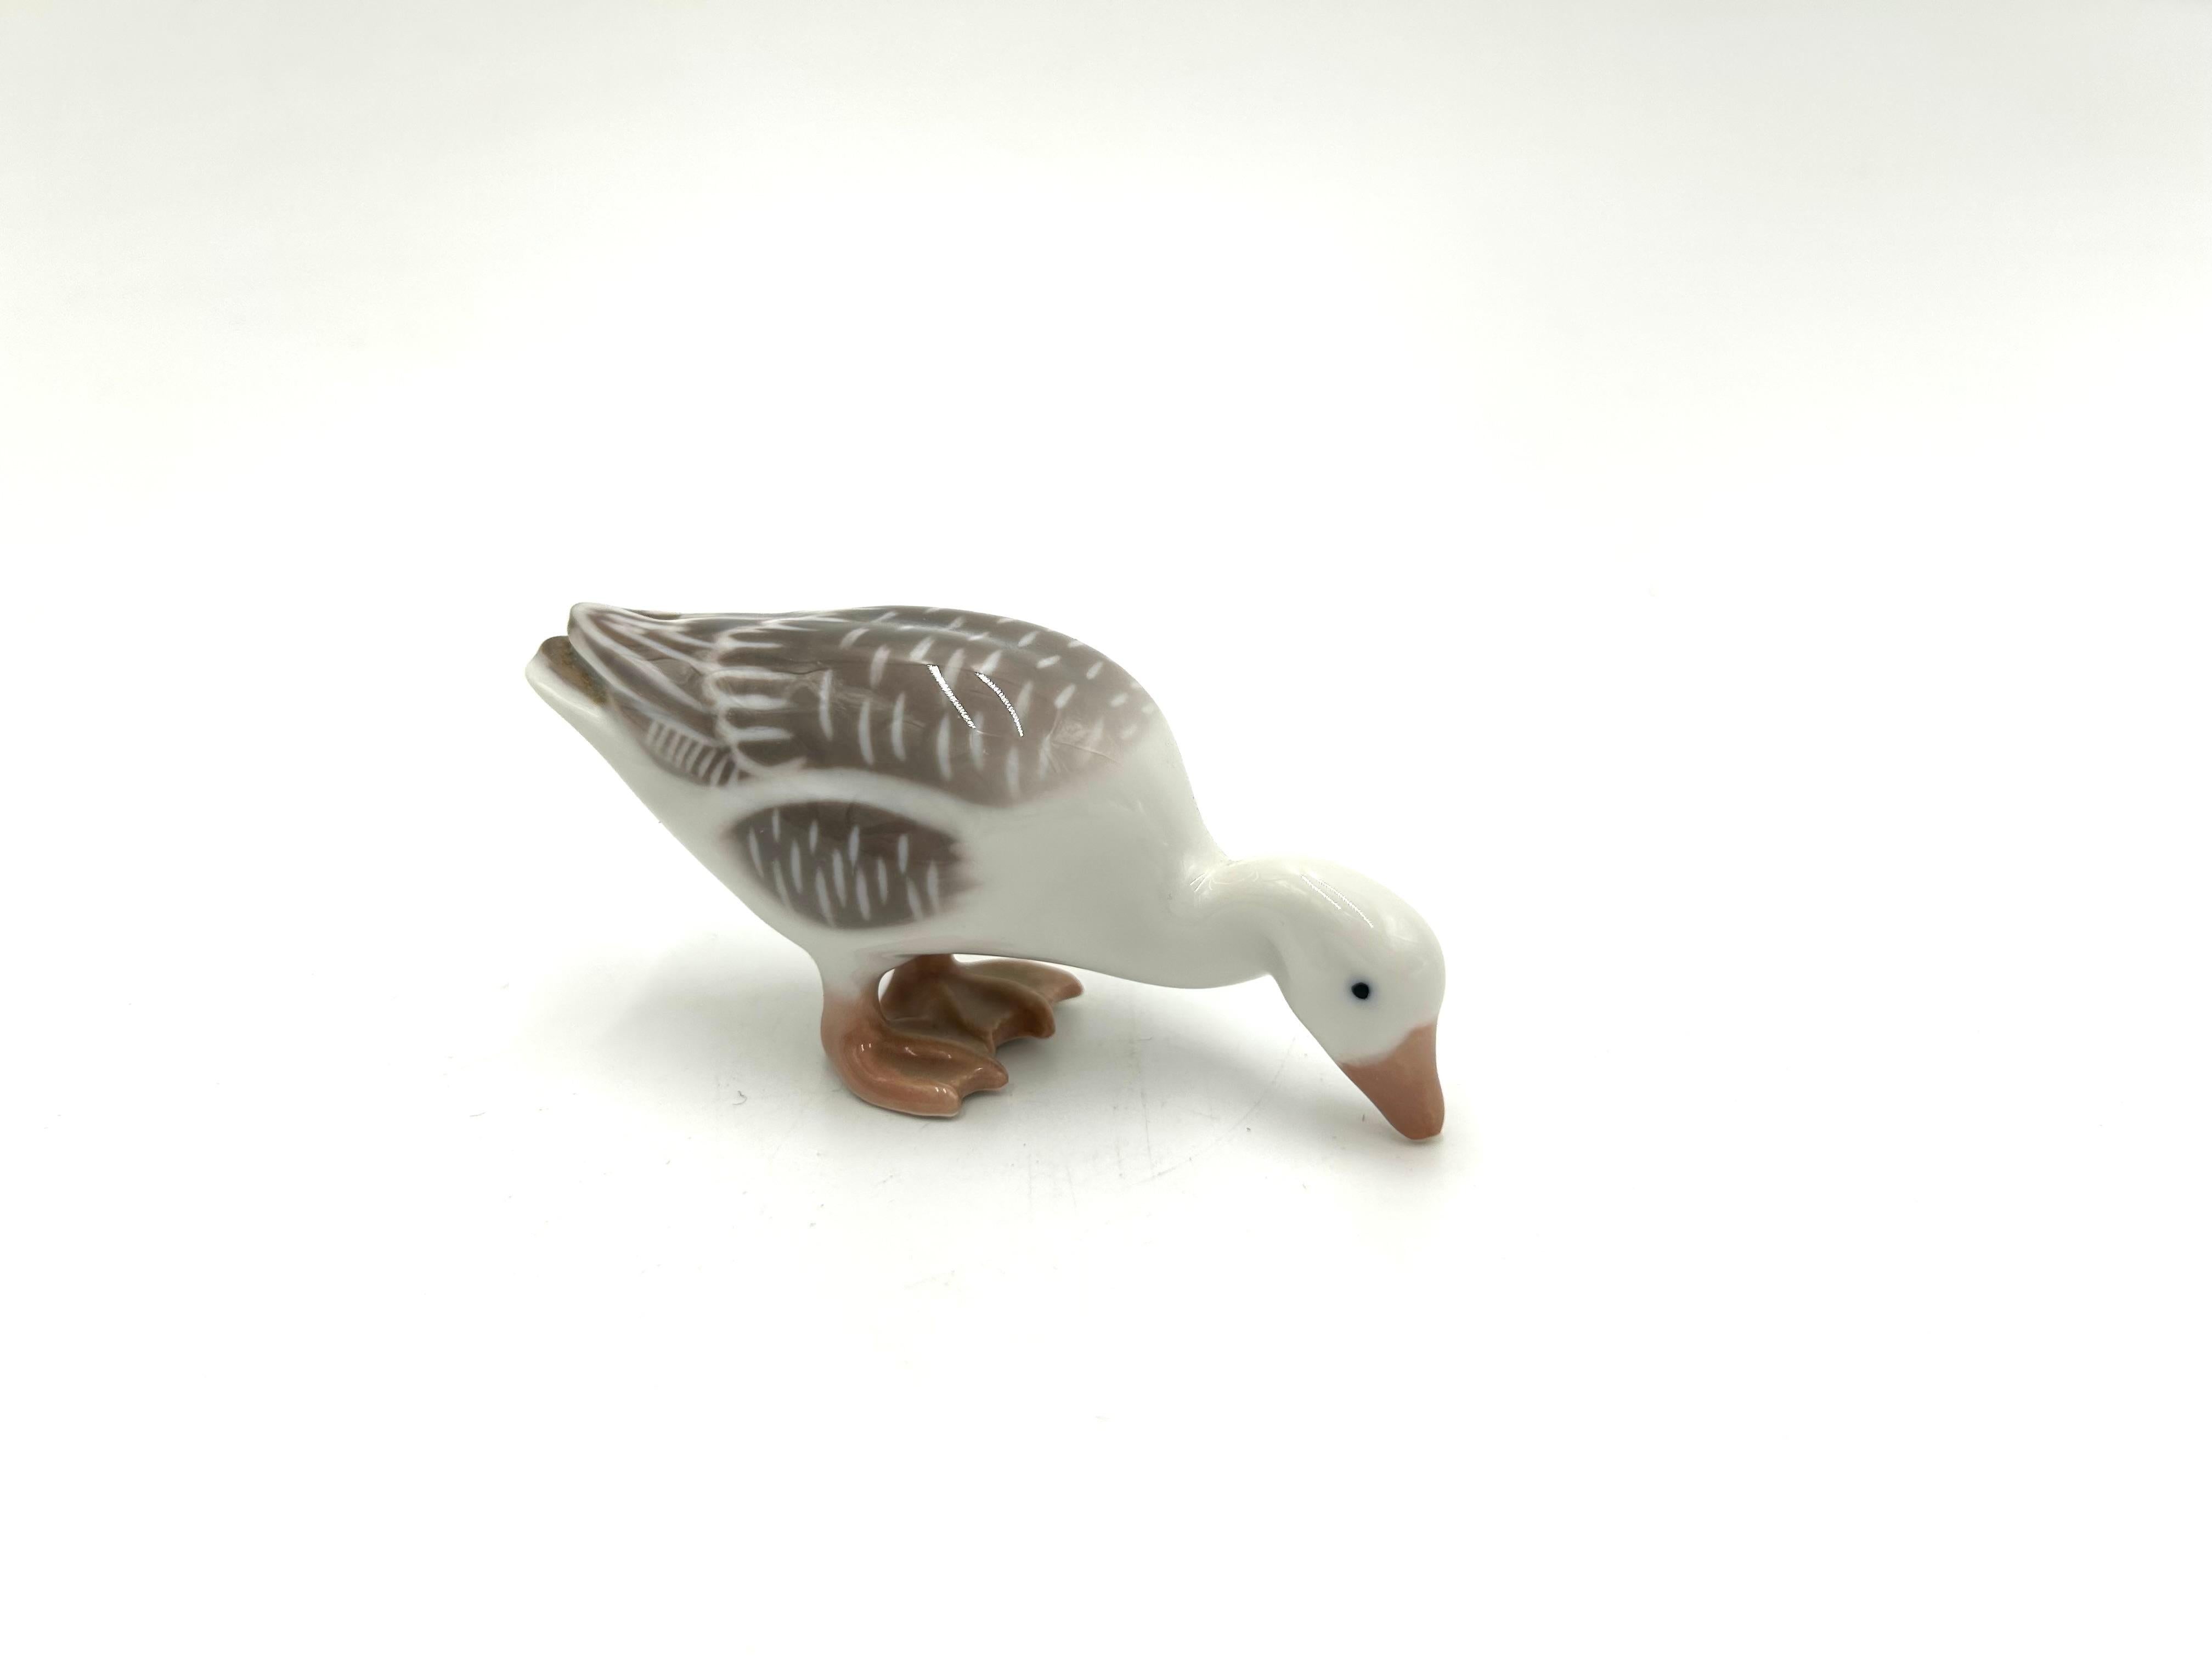 Porcelain small goose figurine

Produced by the Danish manufactory Bing & Grondahl

The mark is used in the 1980s.

Very good condition without damage

Measures : Height: 4cm

Width: 6cm

Depth: 3cm.